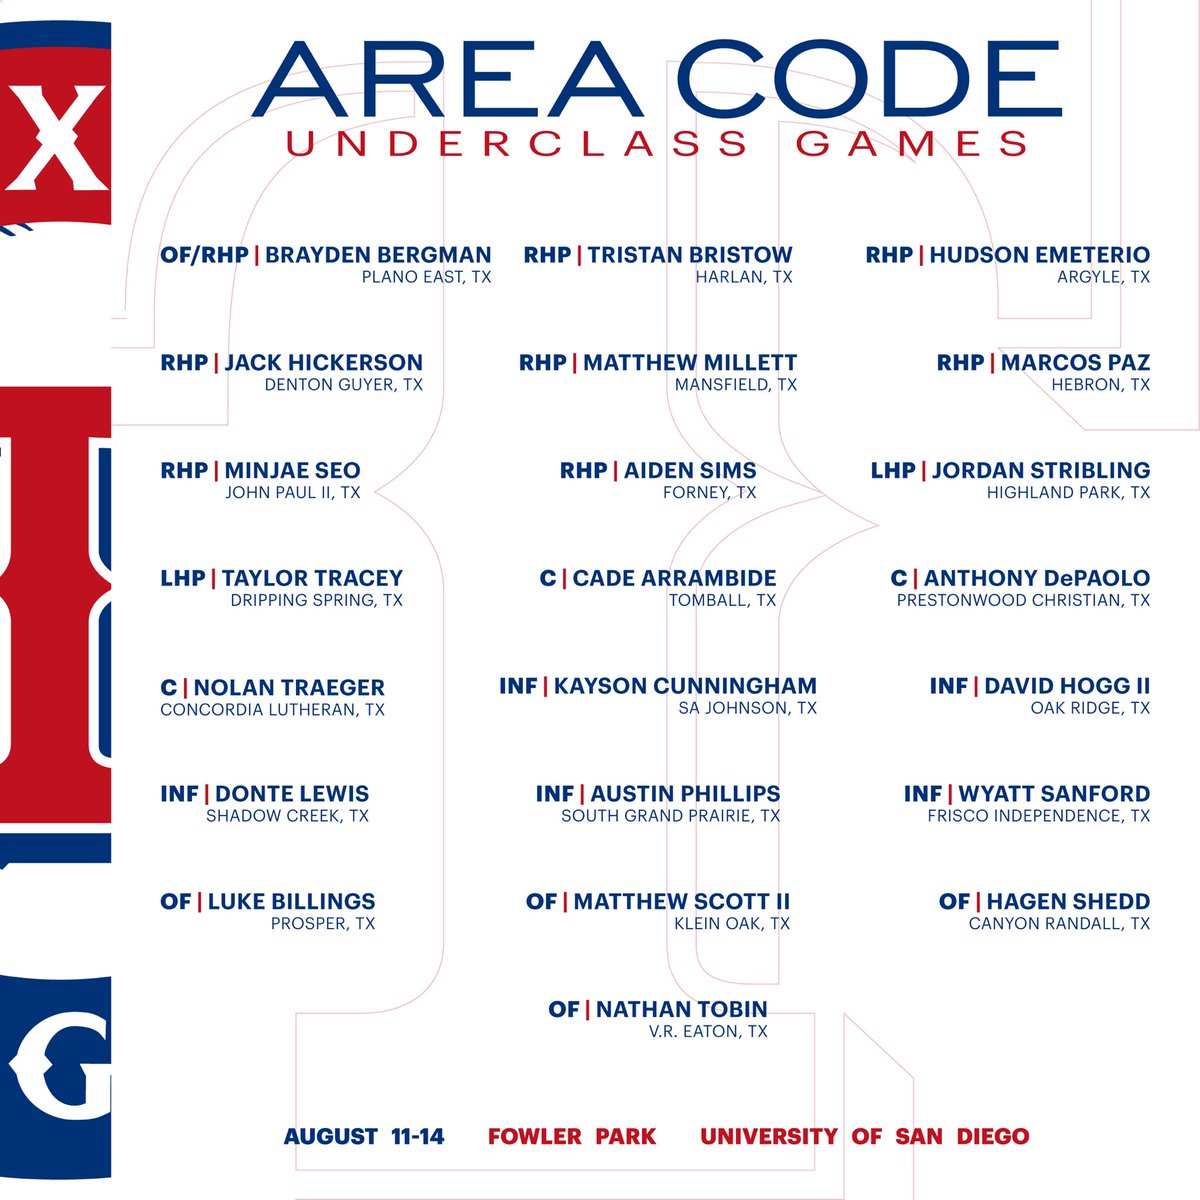 Representing Texas… The @Rangers 2022 Area Code Underclass Games Roster #ACGames22